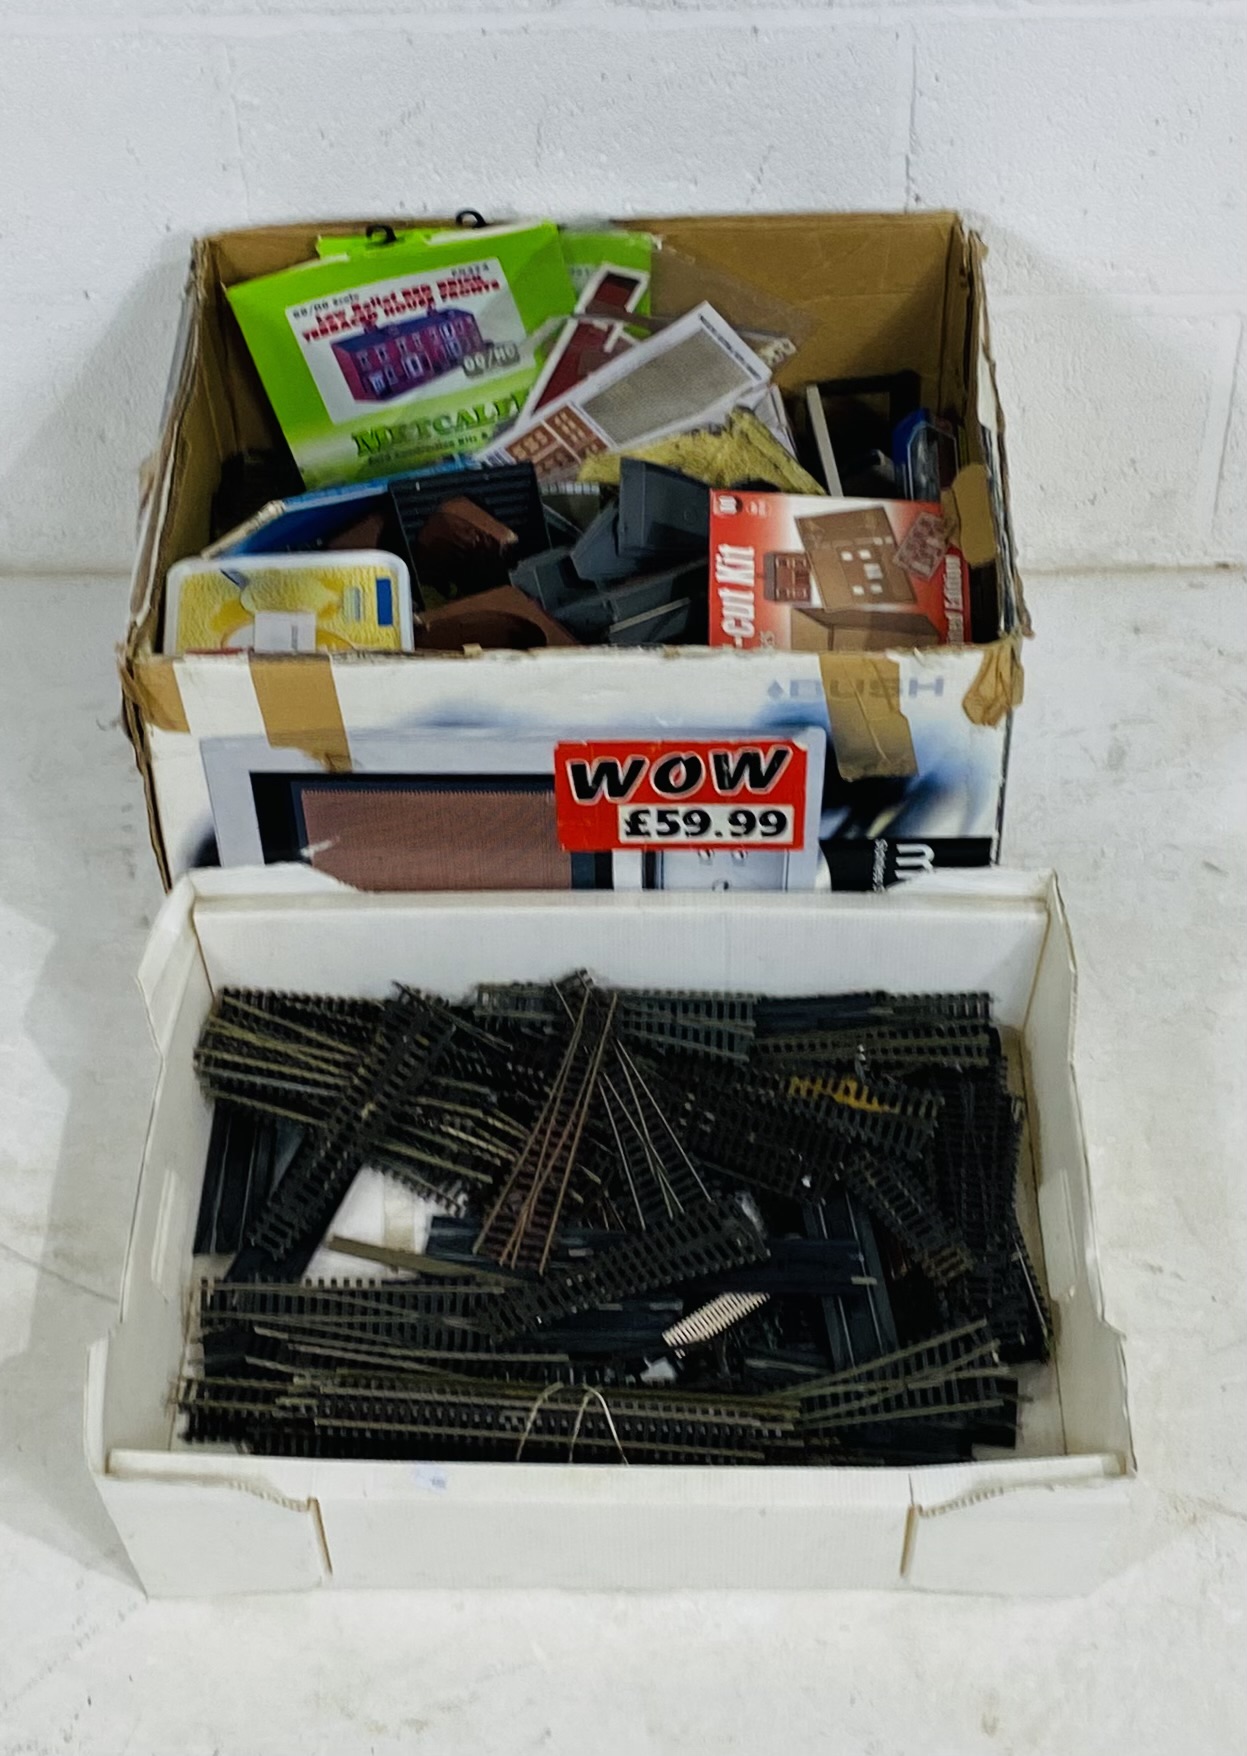 A collection of model railway OO gauge accessories including footbridge kits, tunnels, platforms,